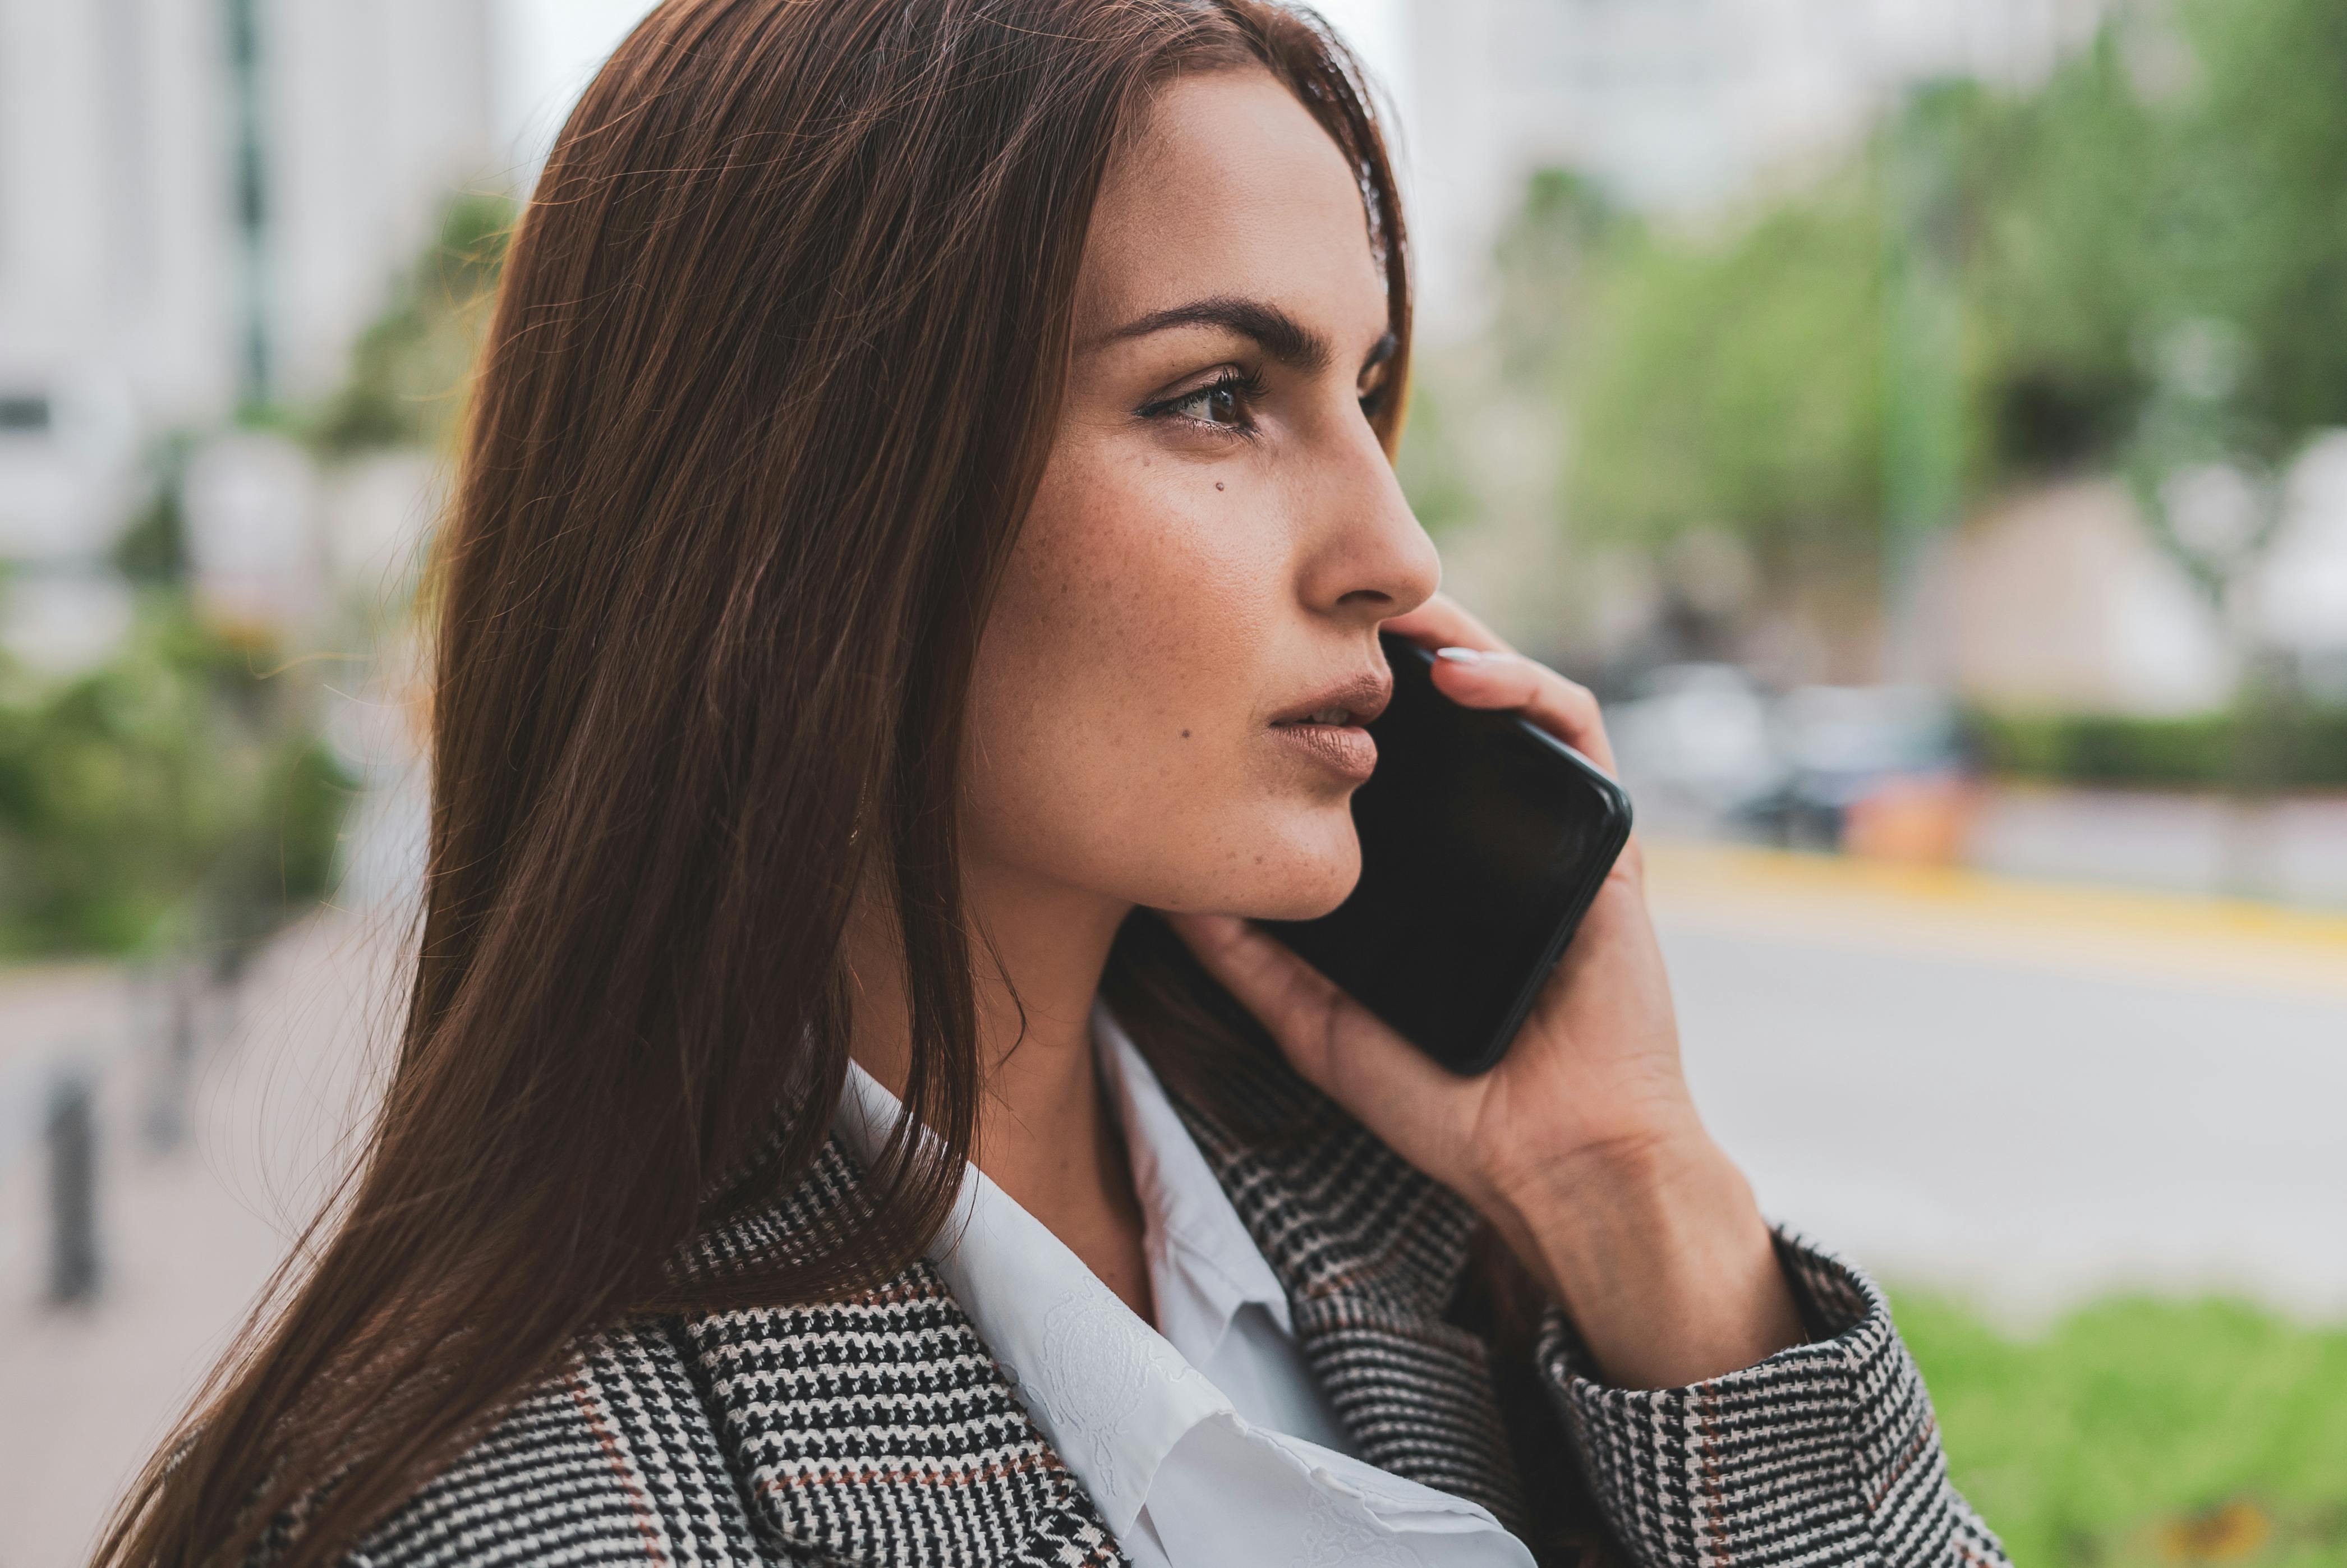 A young woman on phone | Source: Pexels